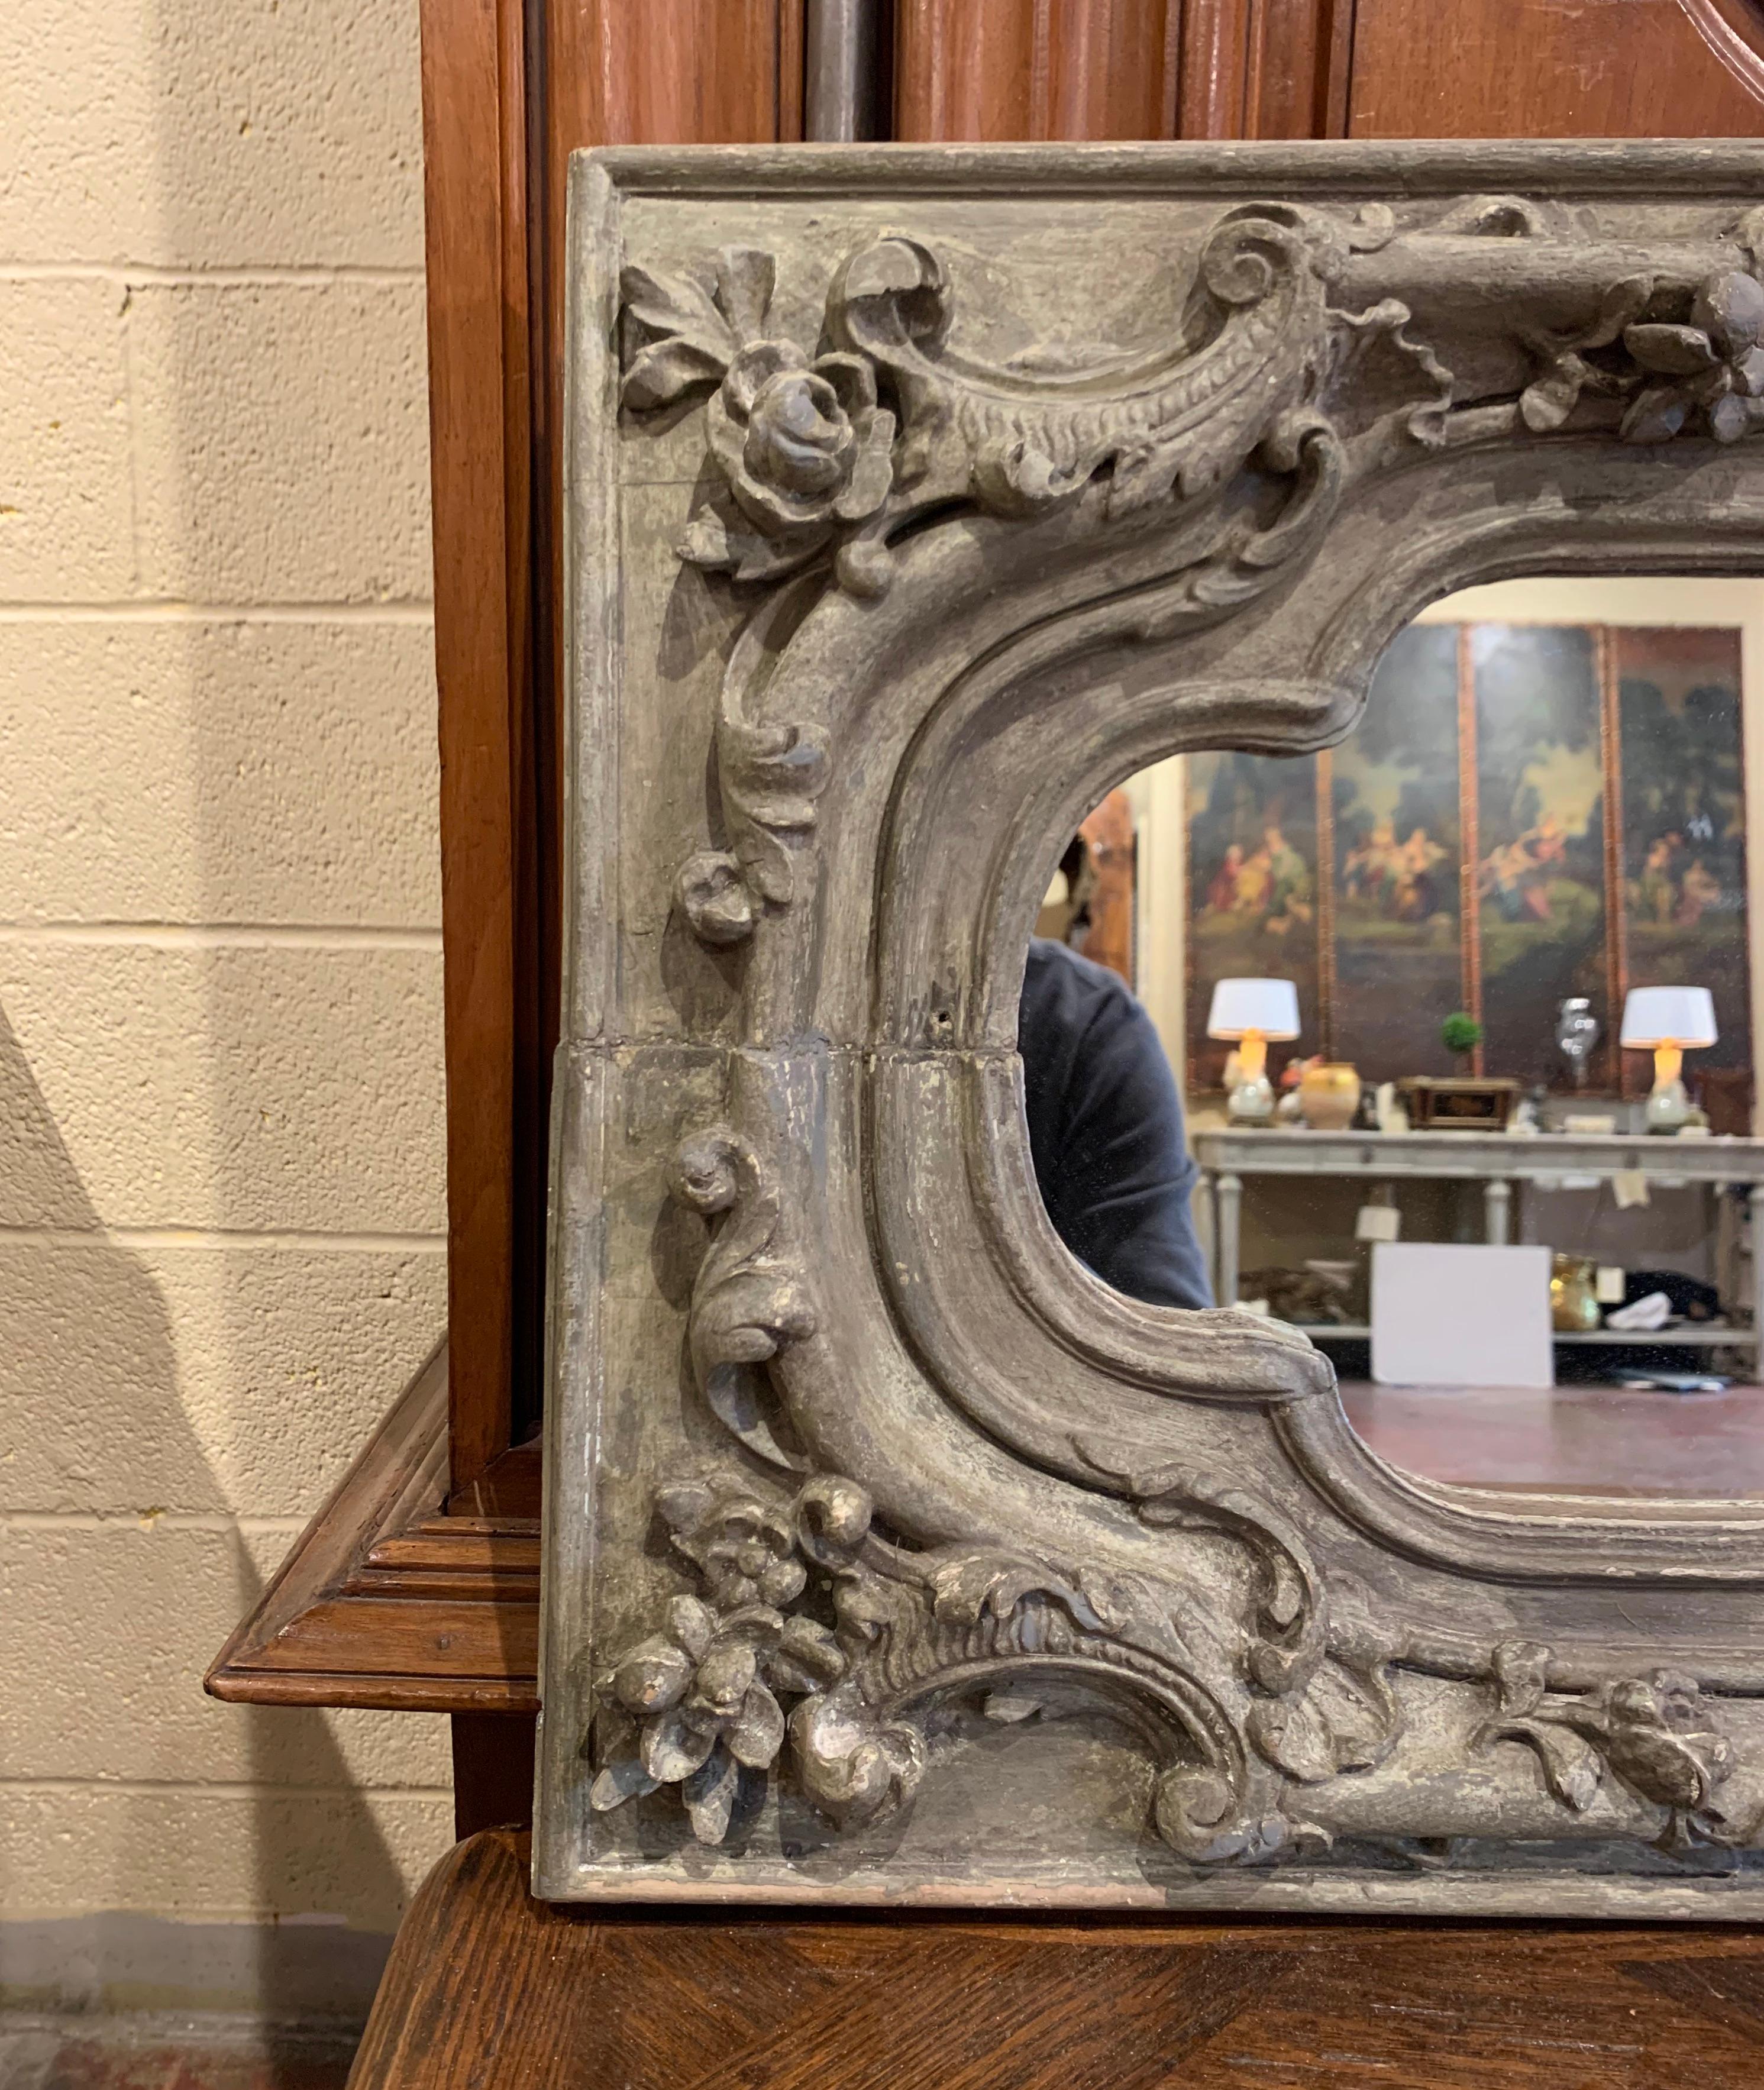 Crafted in France circa 1780, the versatile mirror can either be used vertically or horizontally. Hand carved in oak with old elements, the rectangular frame features scrolled decor embellished with acanthus leaf and floral motifs in high relief.